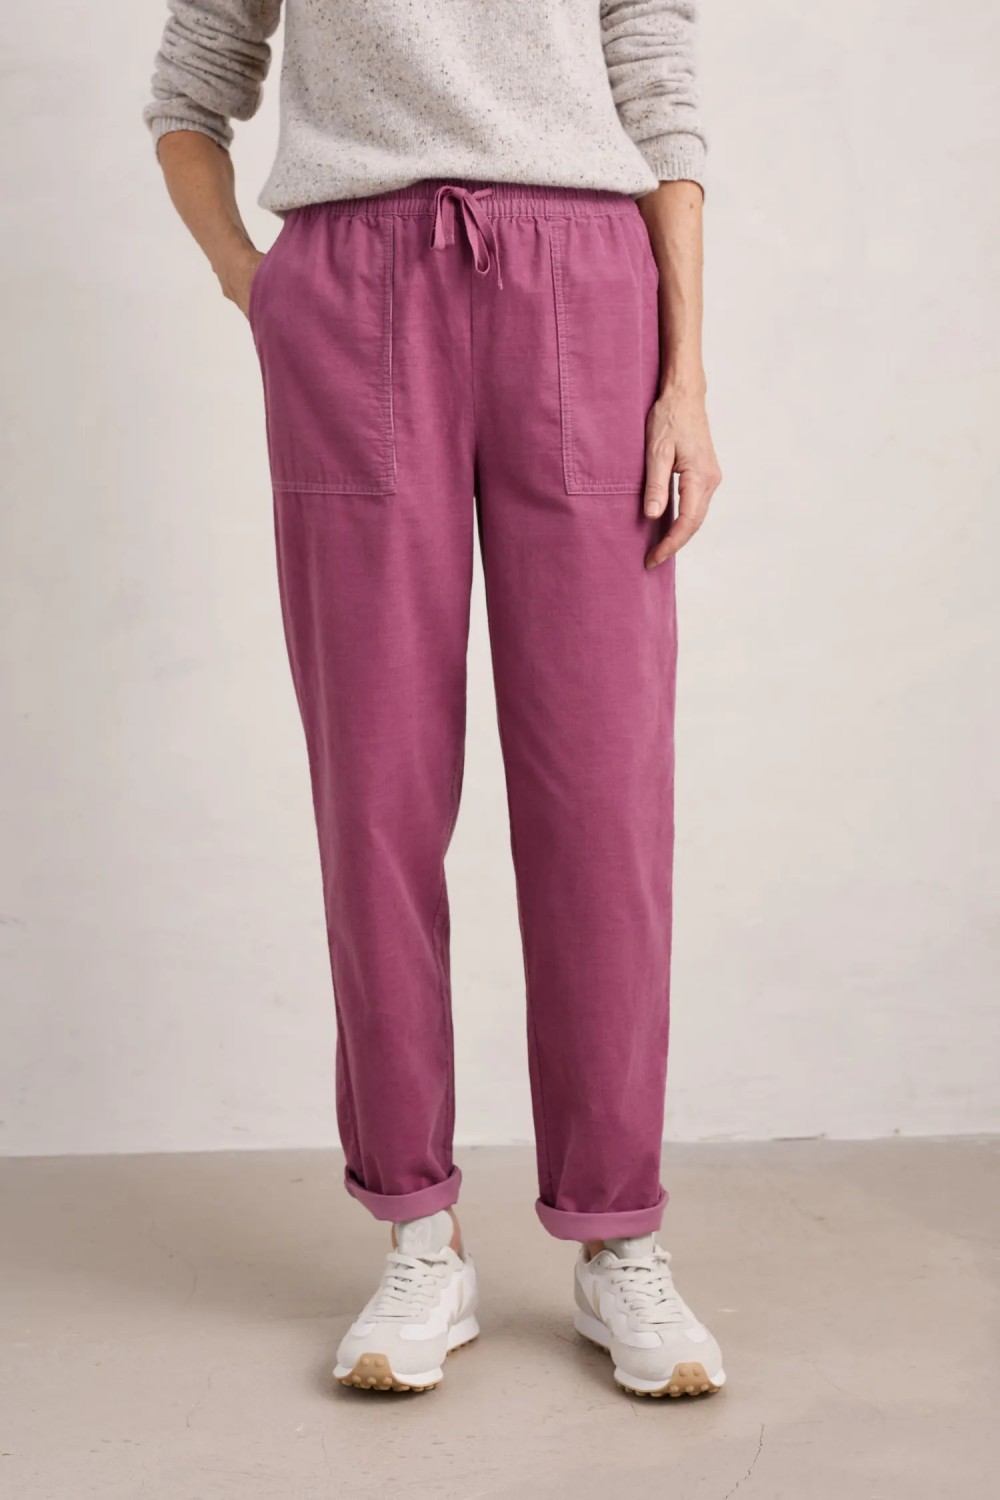 Seasalt Clothing Dayby Cord Trousers Buddleia